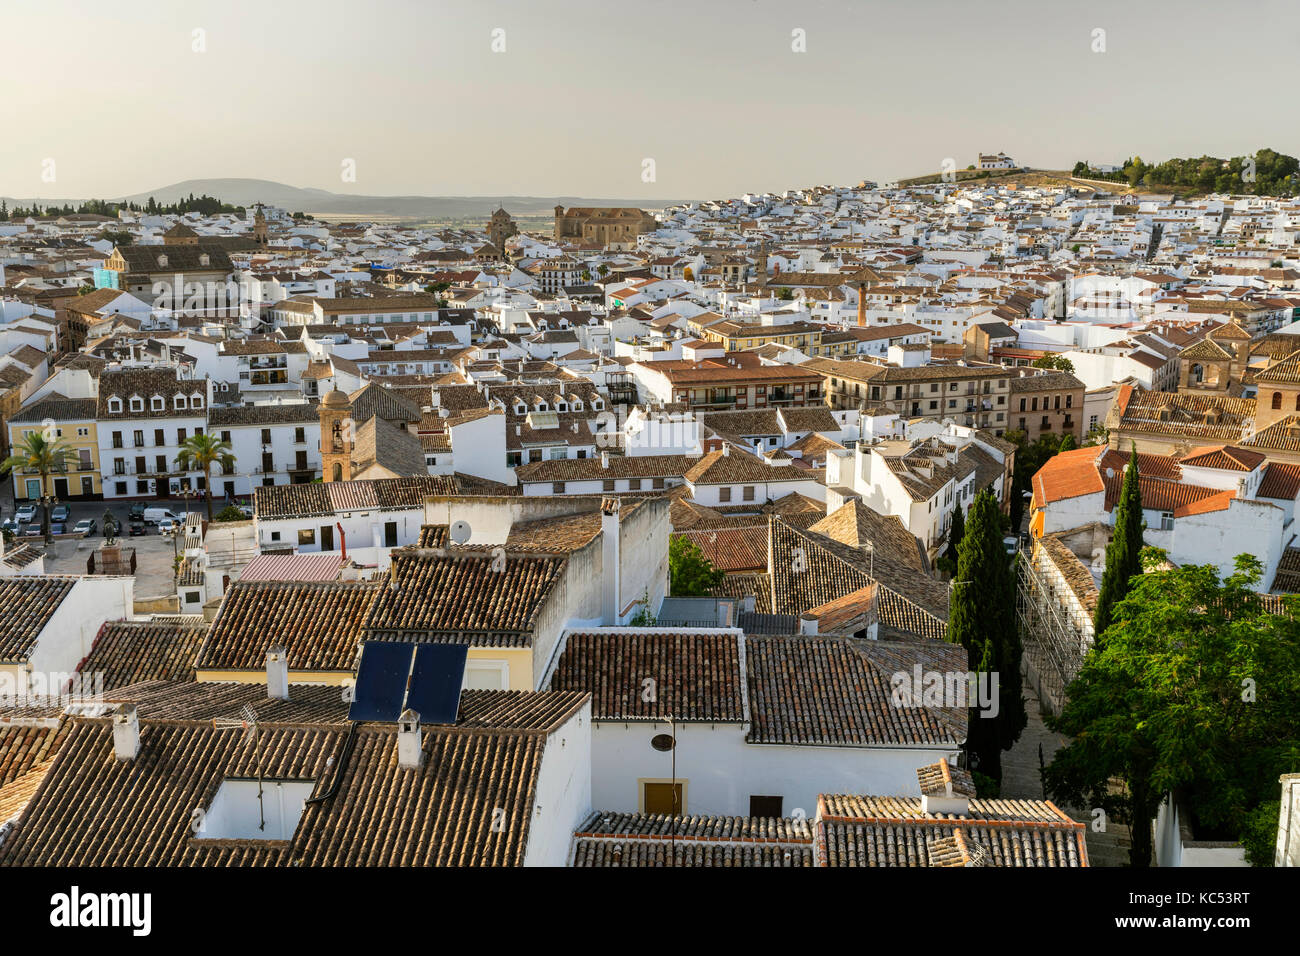 View of the Old Town, Antequera, province of Malaga, Andalusia, Spain Stock Photo